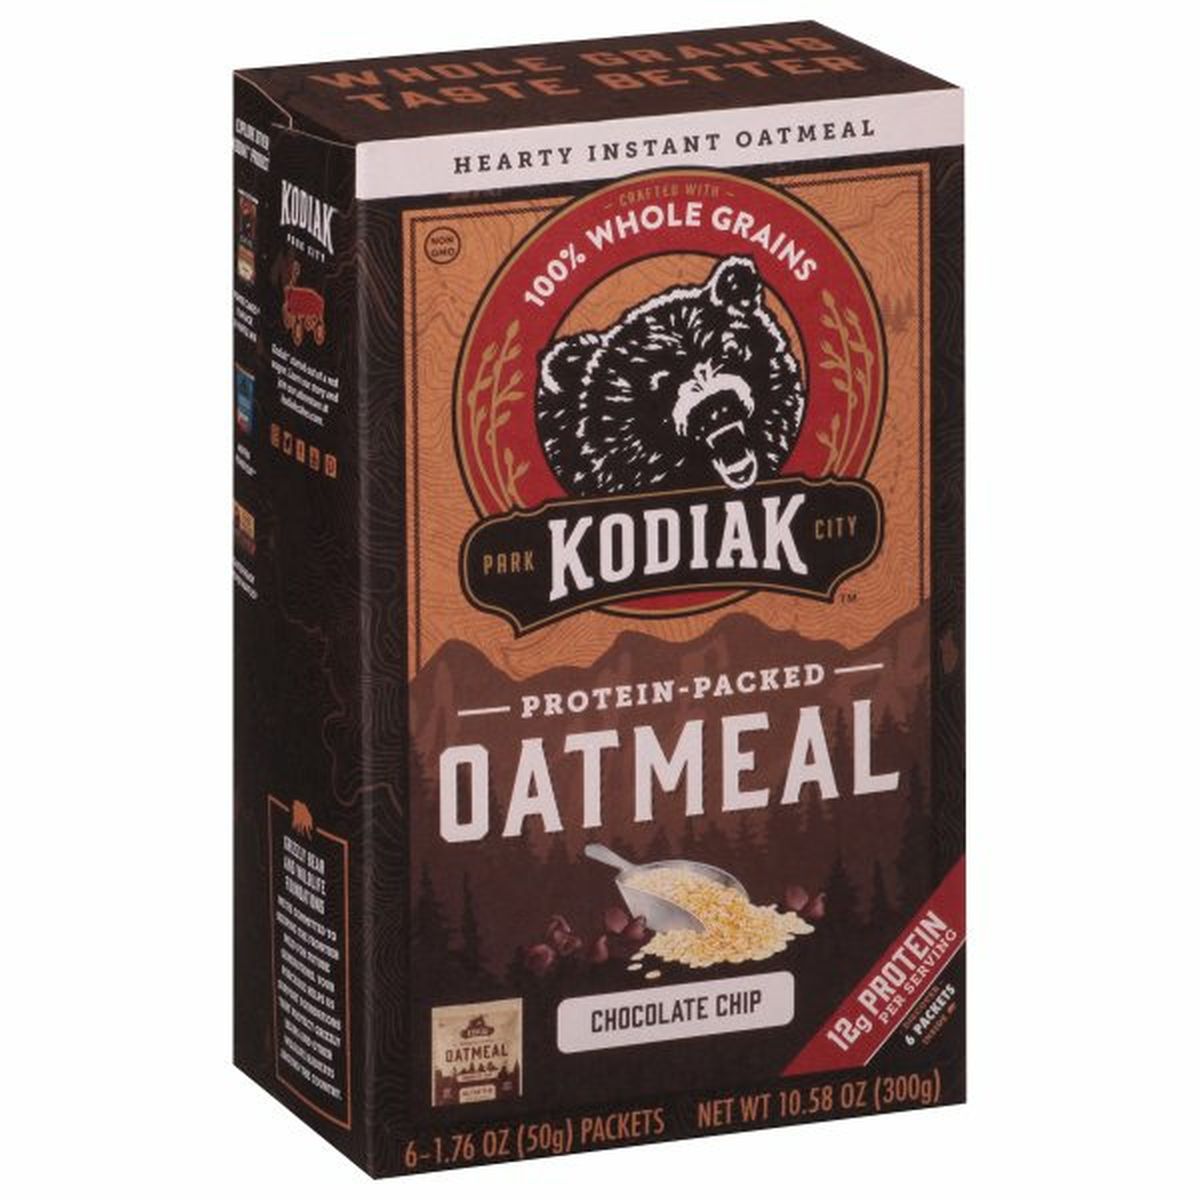 Calories in Kodiak Oatmeal, Chocolate Chip, Protein-Packed